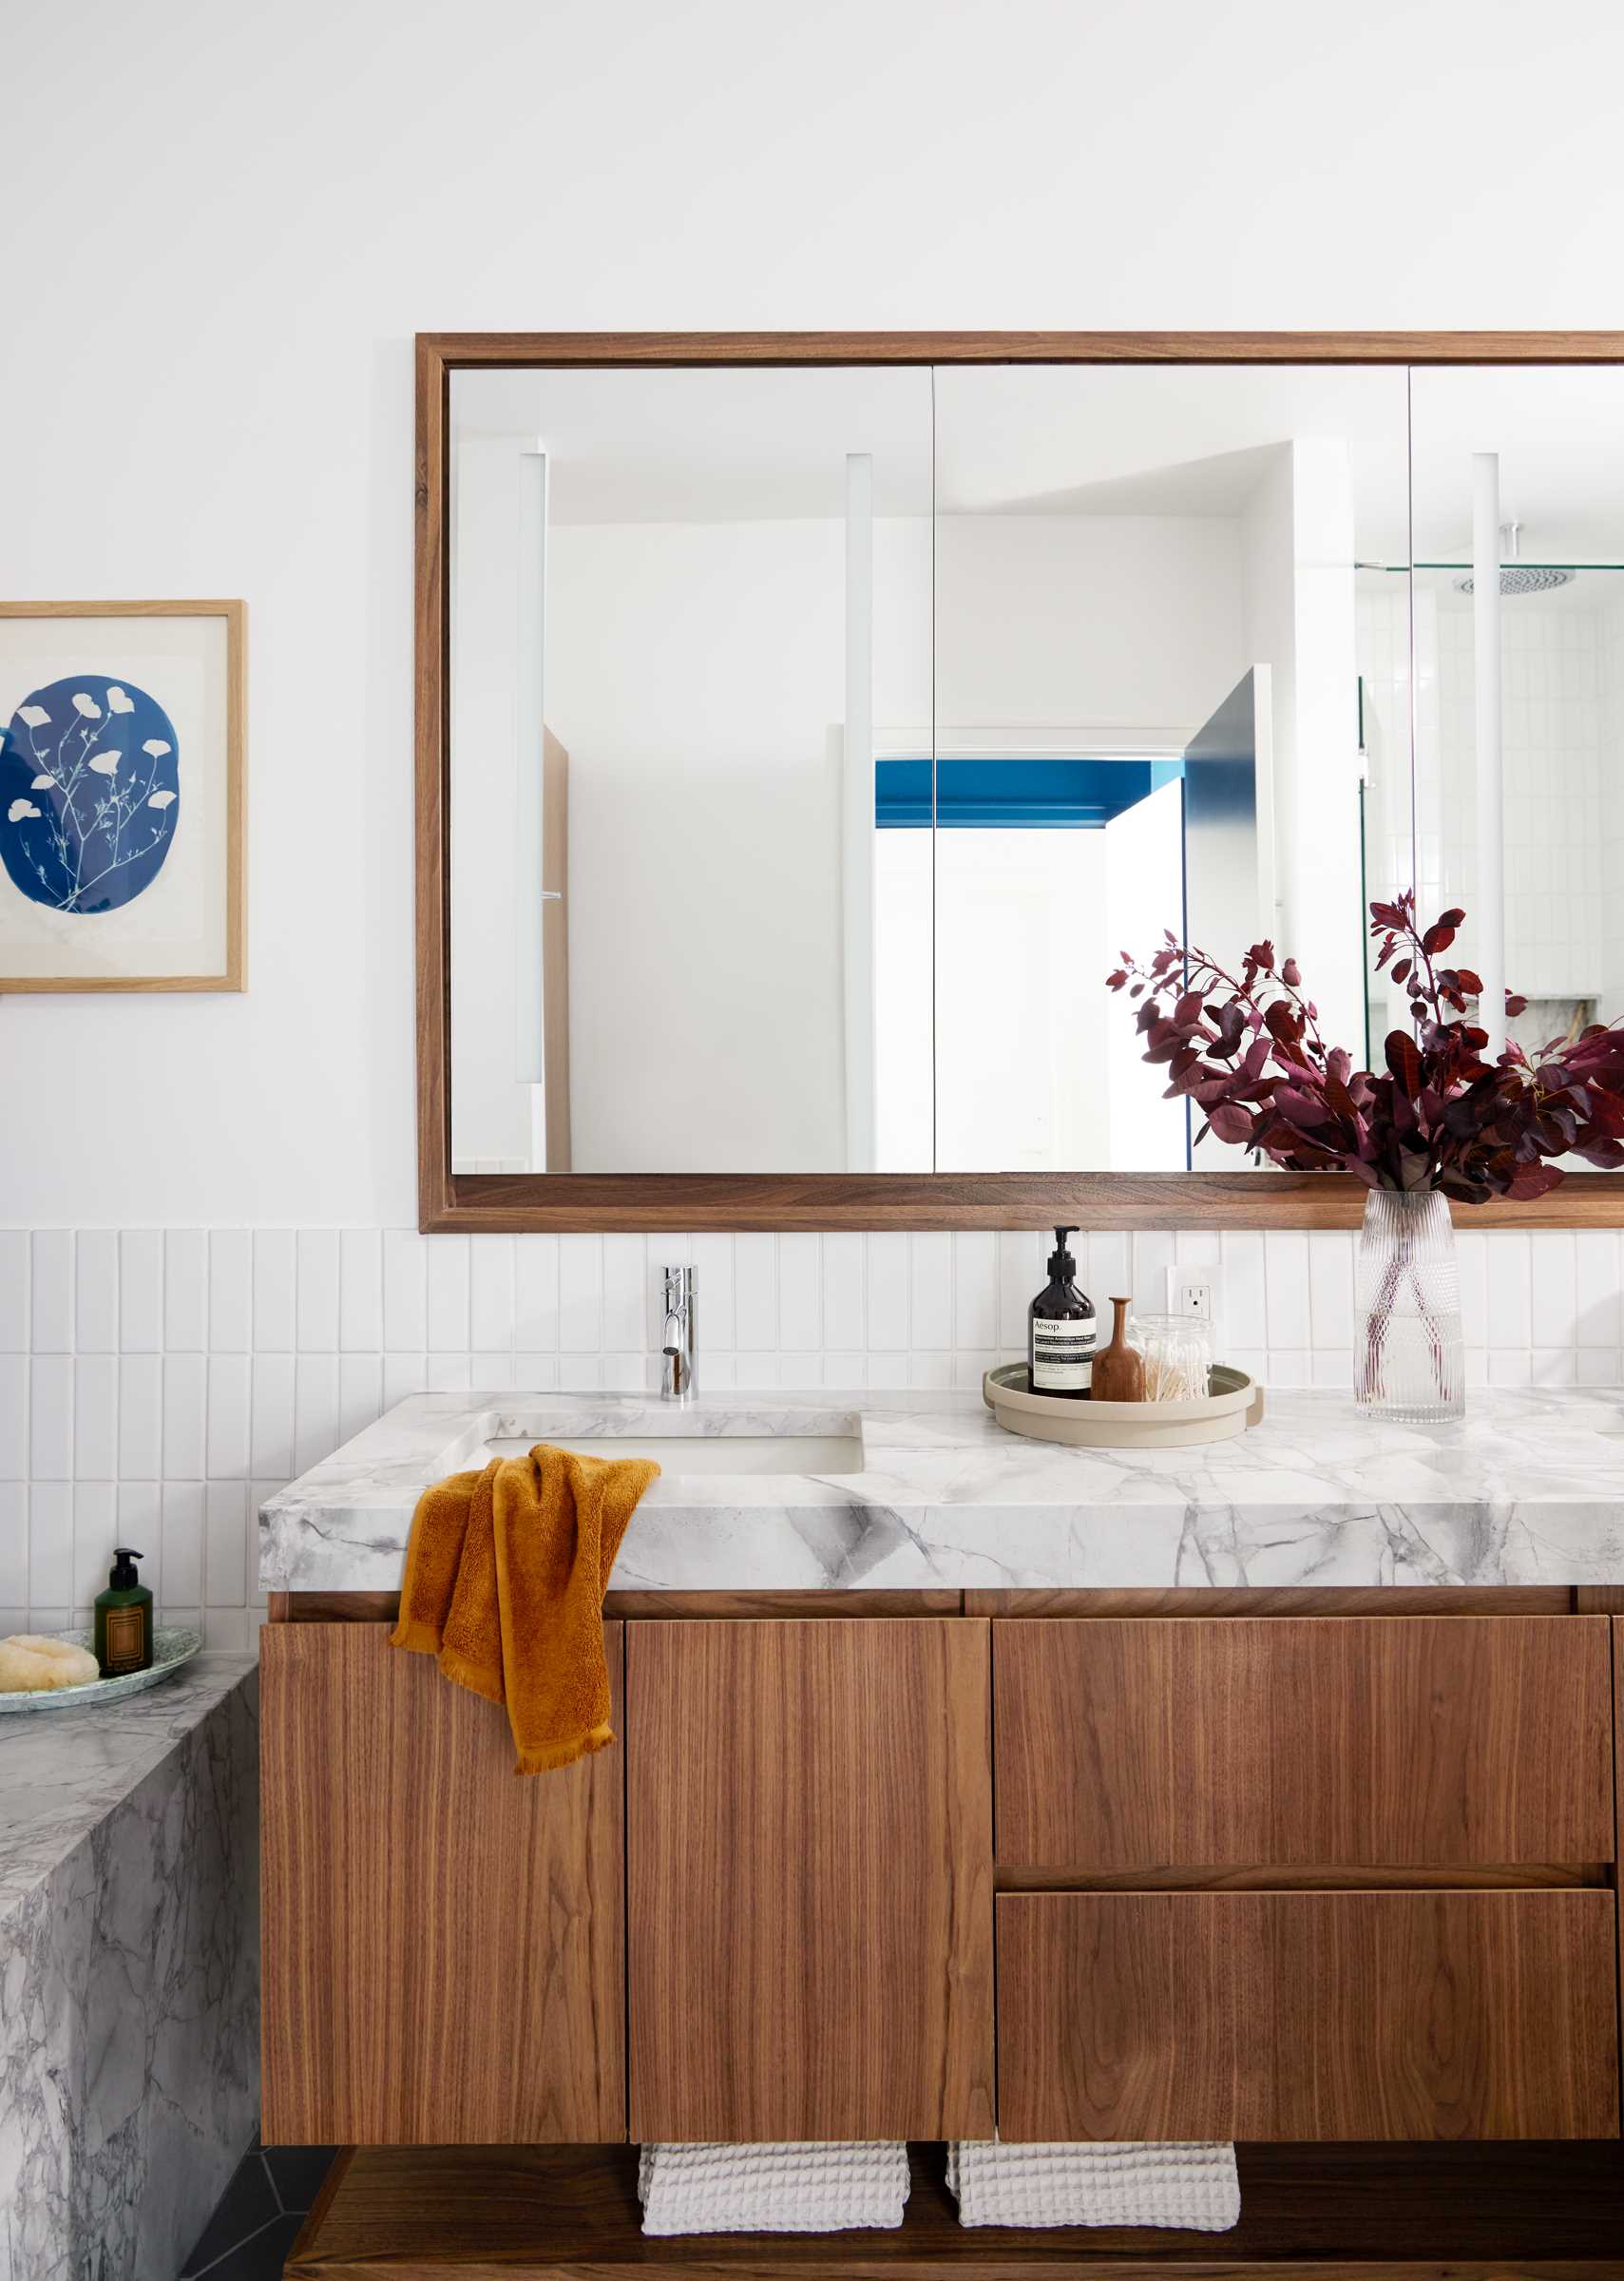 The updated primary bathroom includes Dolomite countertop and bathtub surround, while a new wood vanity increases storage, and vertical subway tiles line the walls.